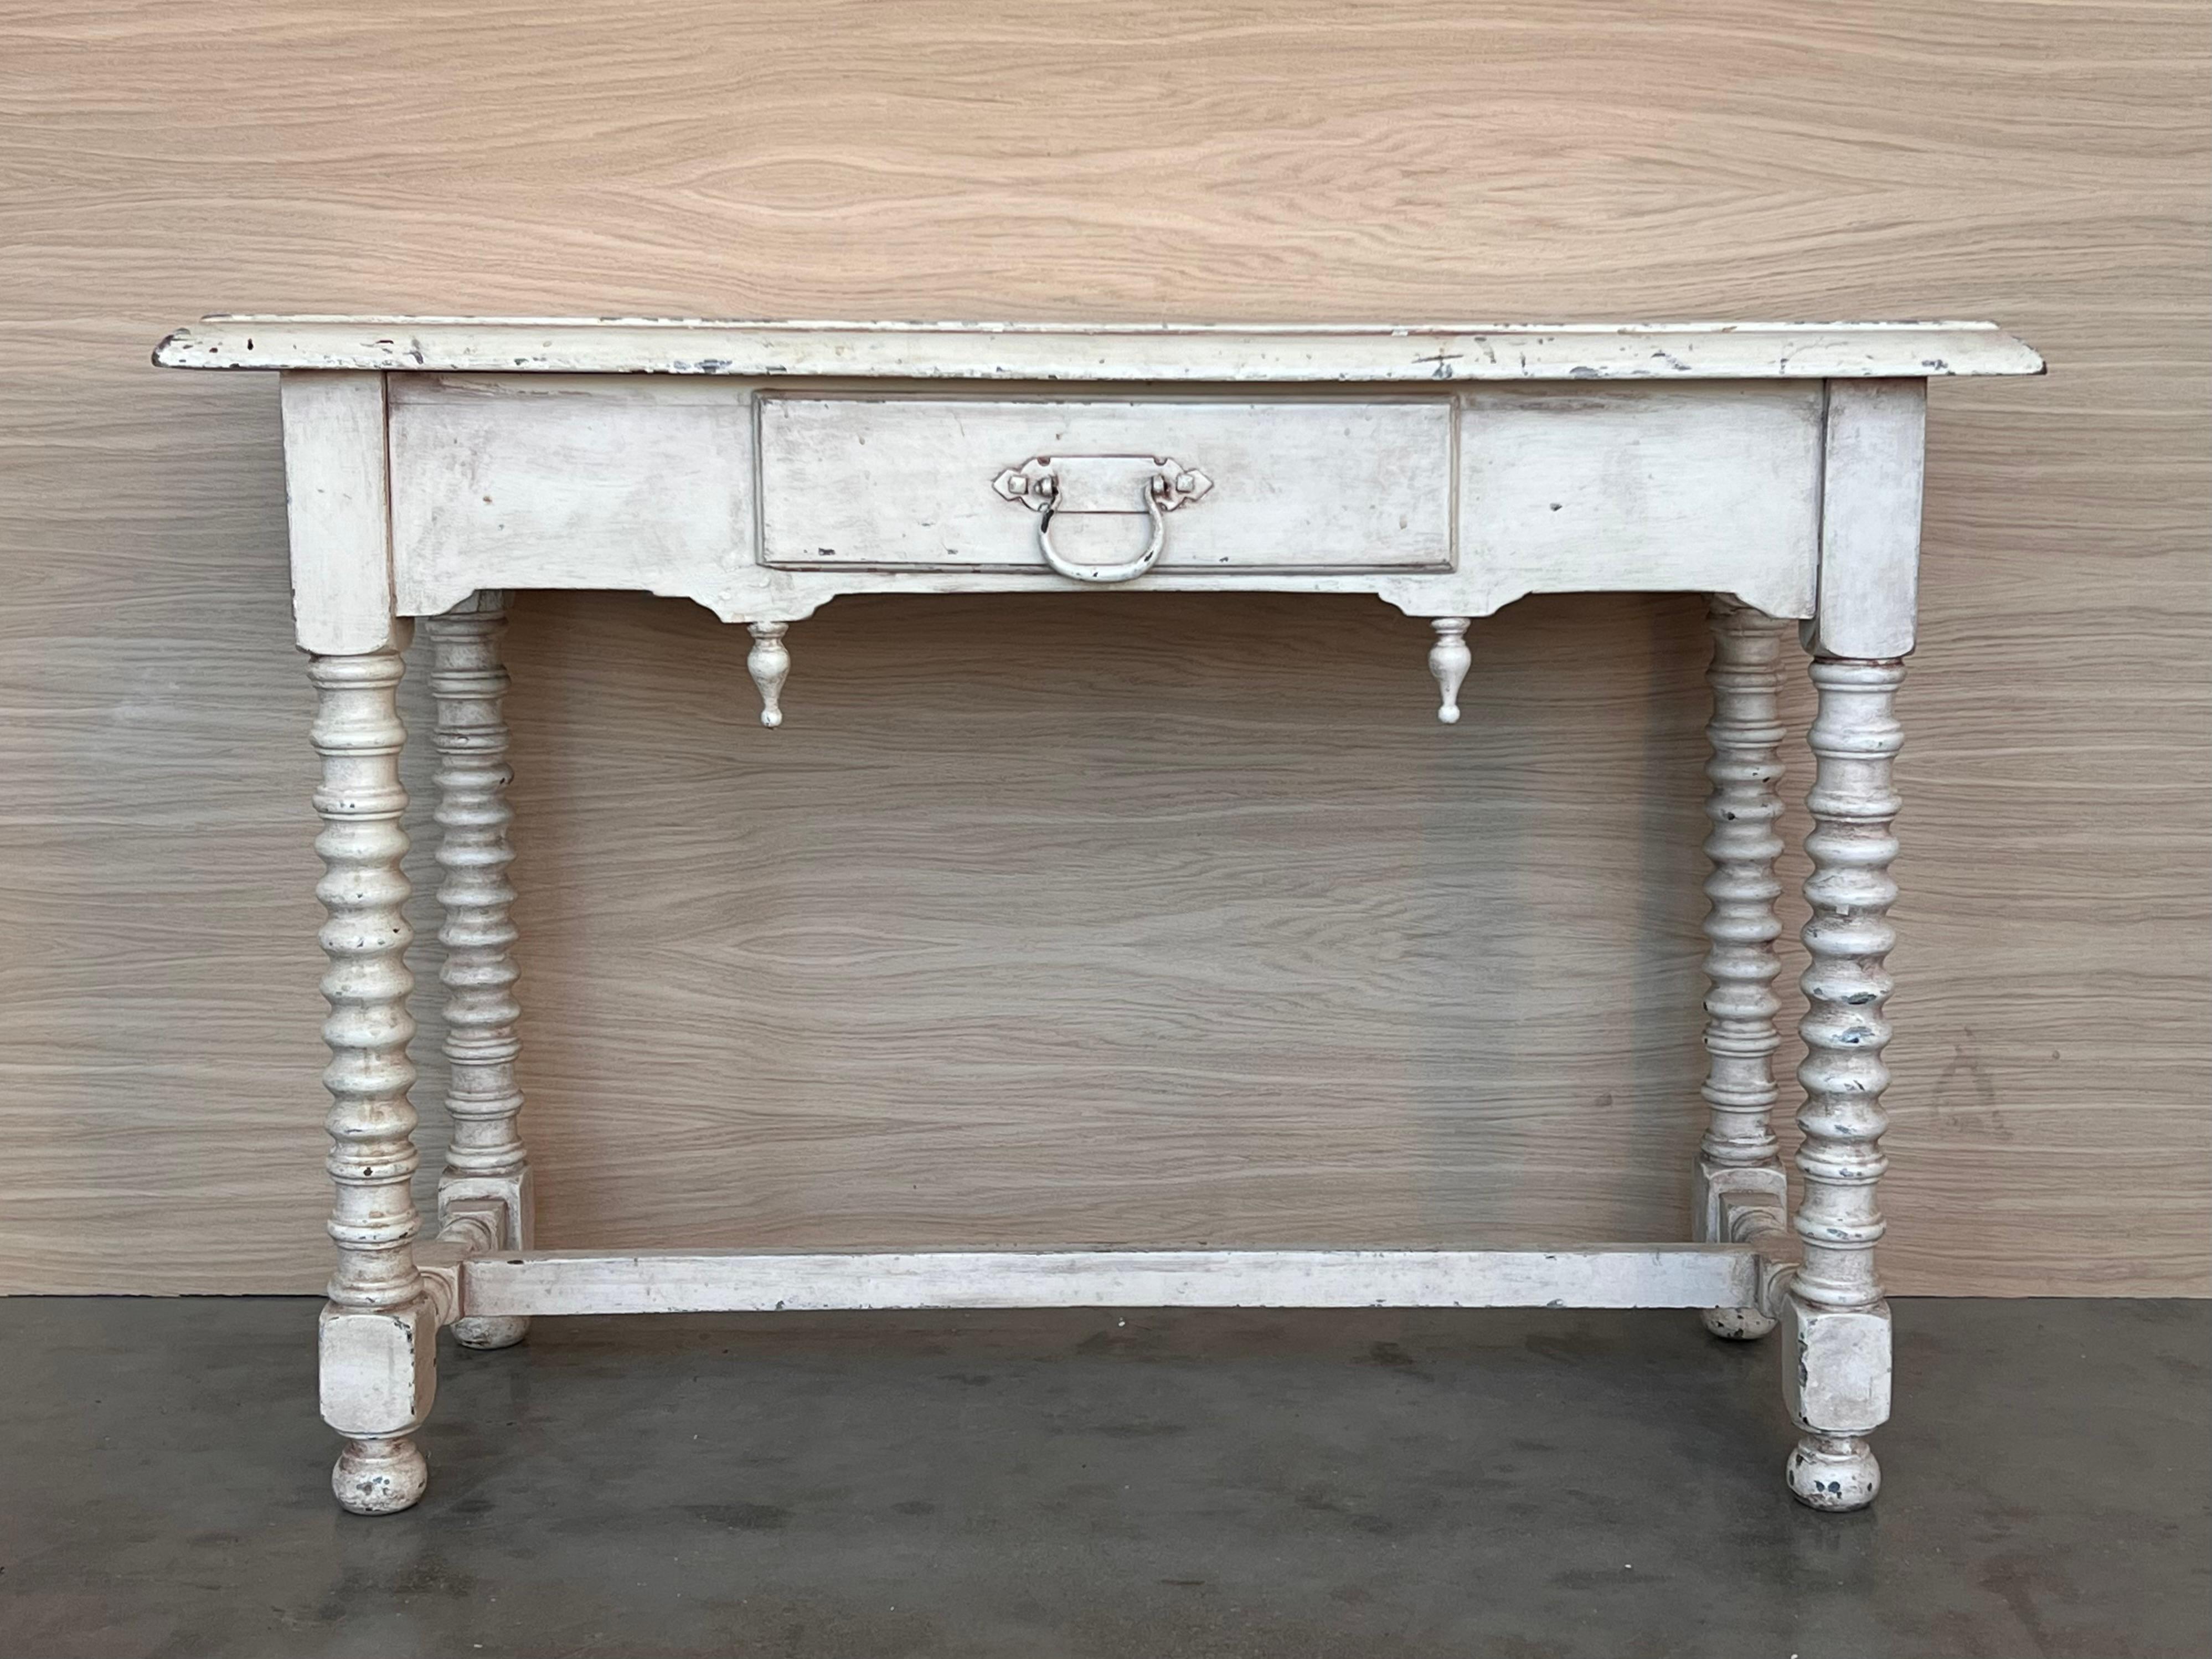 A rustic antique farmhouse harvest table from the turn of the late 19th / early 20th century. Restored, retaining original character, distressed painted white, the plank top with rich, warm antique white color and tone, superb grain pattern and